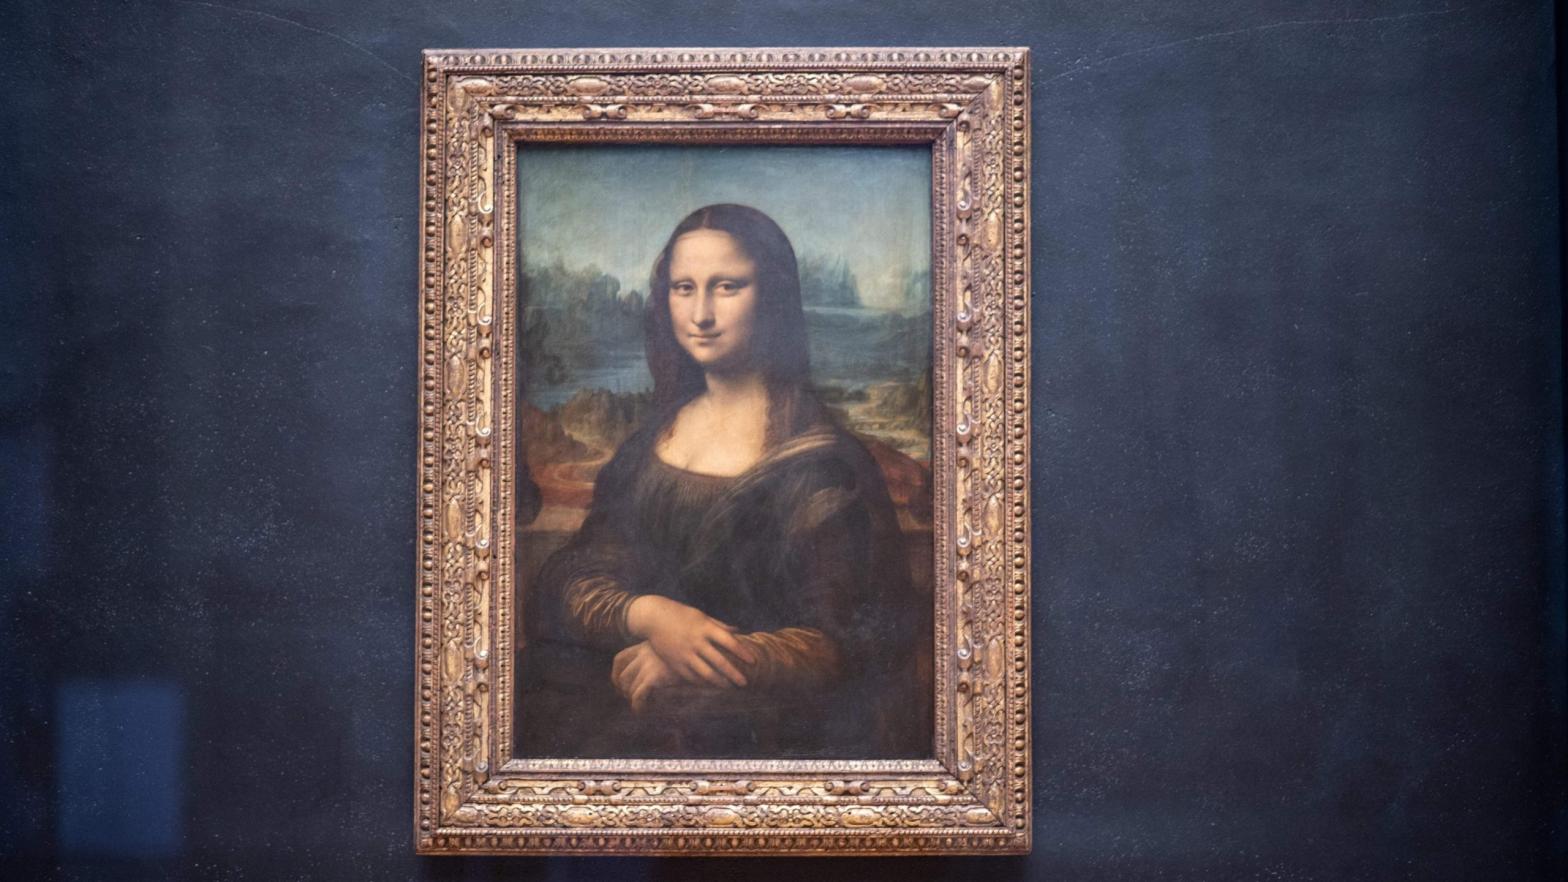 The Mona Lisa at the Louvre Museum in Paris on January 8, 2021.  (Photo: Martin Bureau / AFP, Getty Images)